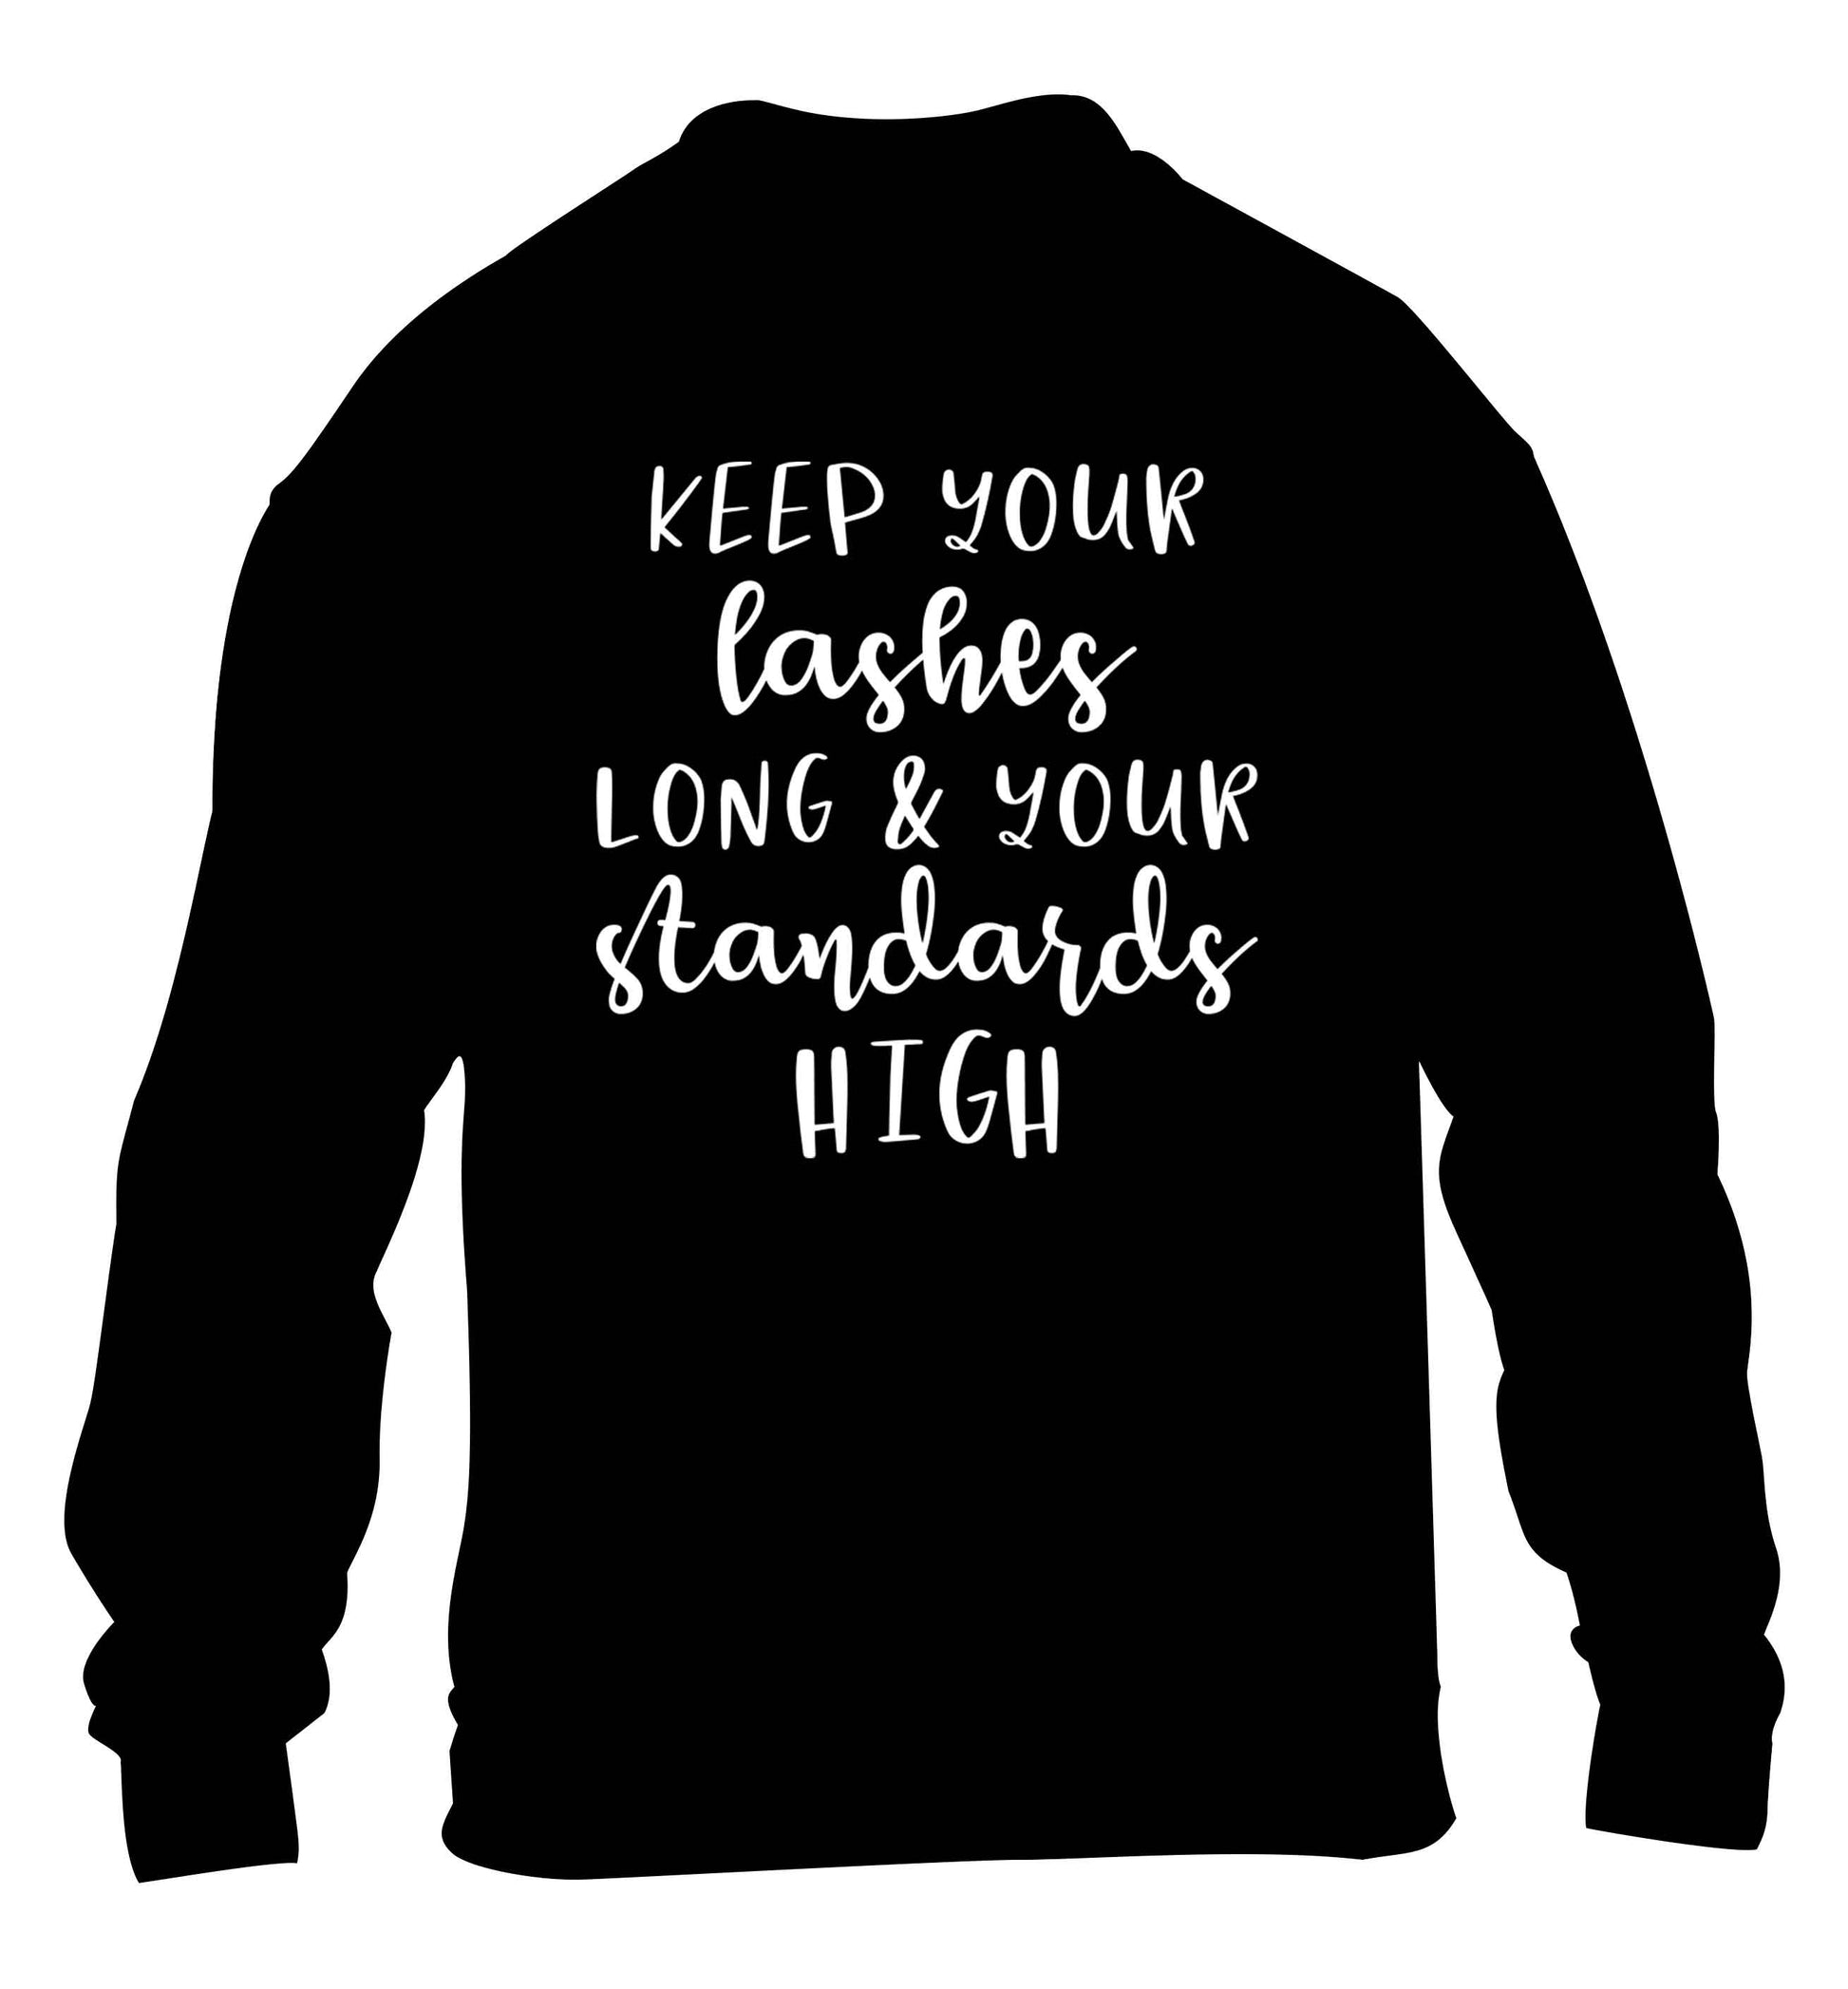 Keep your lashes long and your standards high children's black sweater 12-13 Years